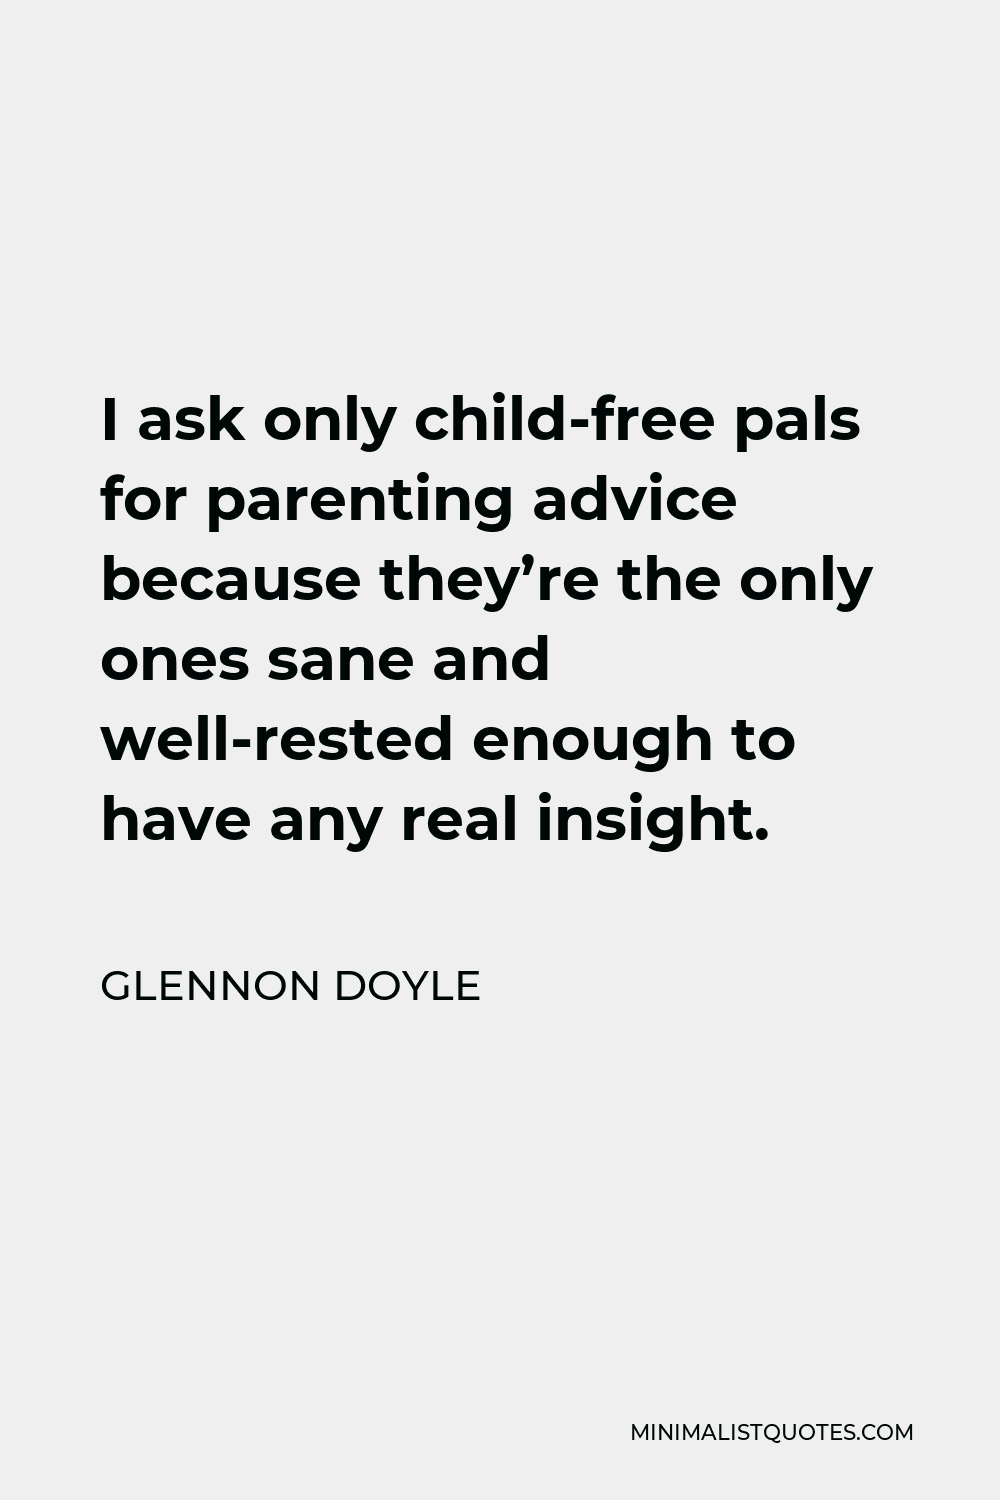 Glennon Doyle Quote - I ask only child-free pals for parenting advice because they’re the only ones sane and well-rested enough to have any real insight.